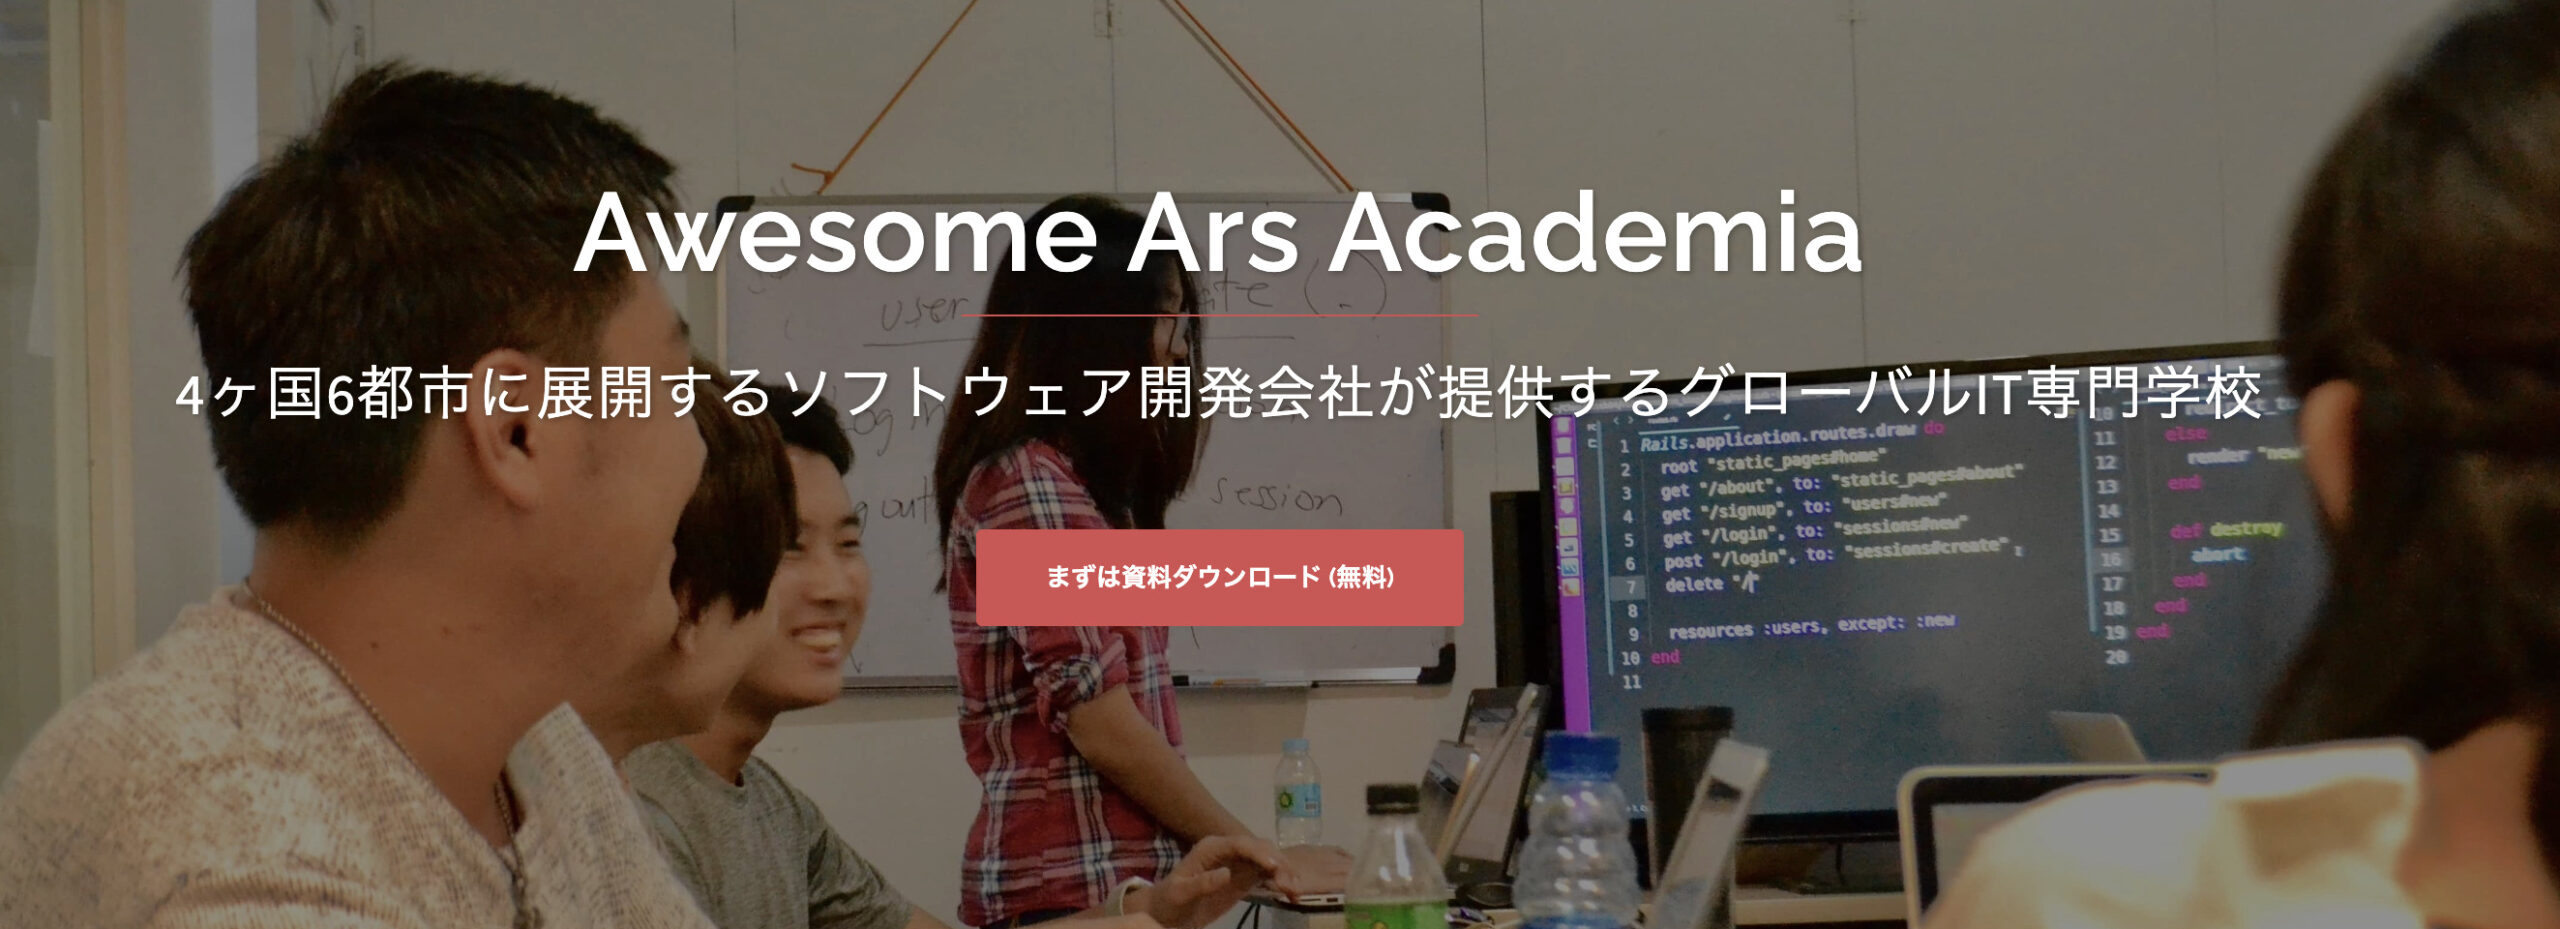 Awesome Ars Academiaの公式ホームページより